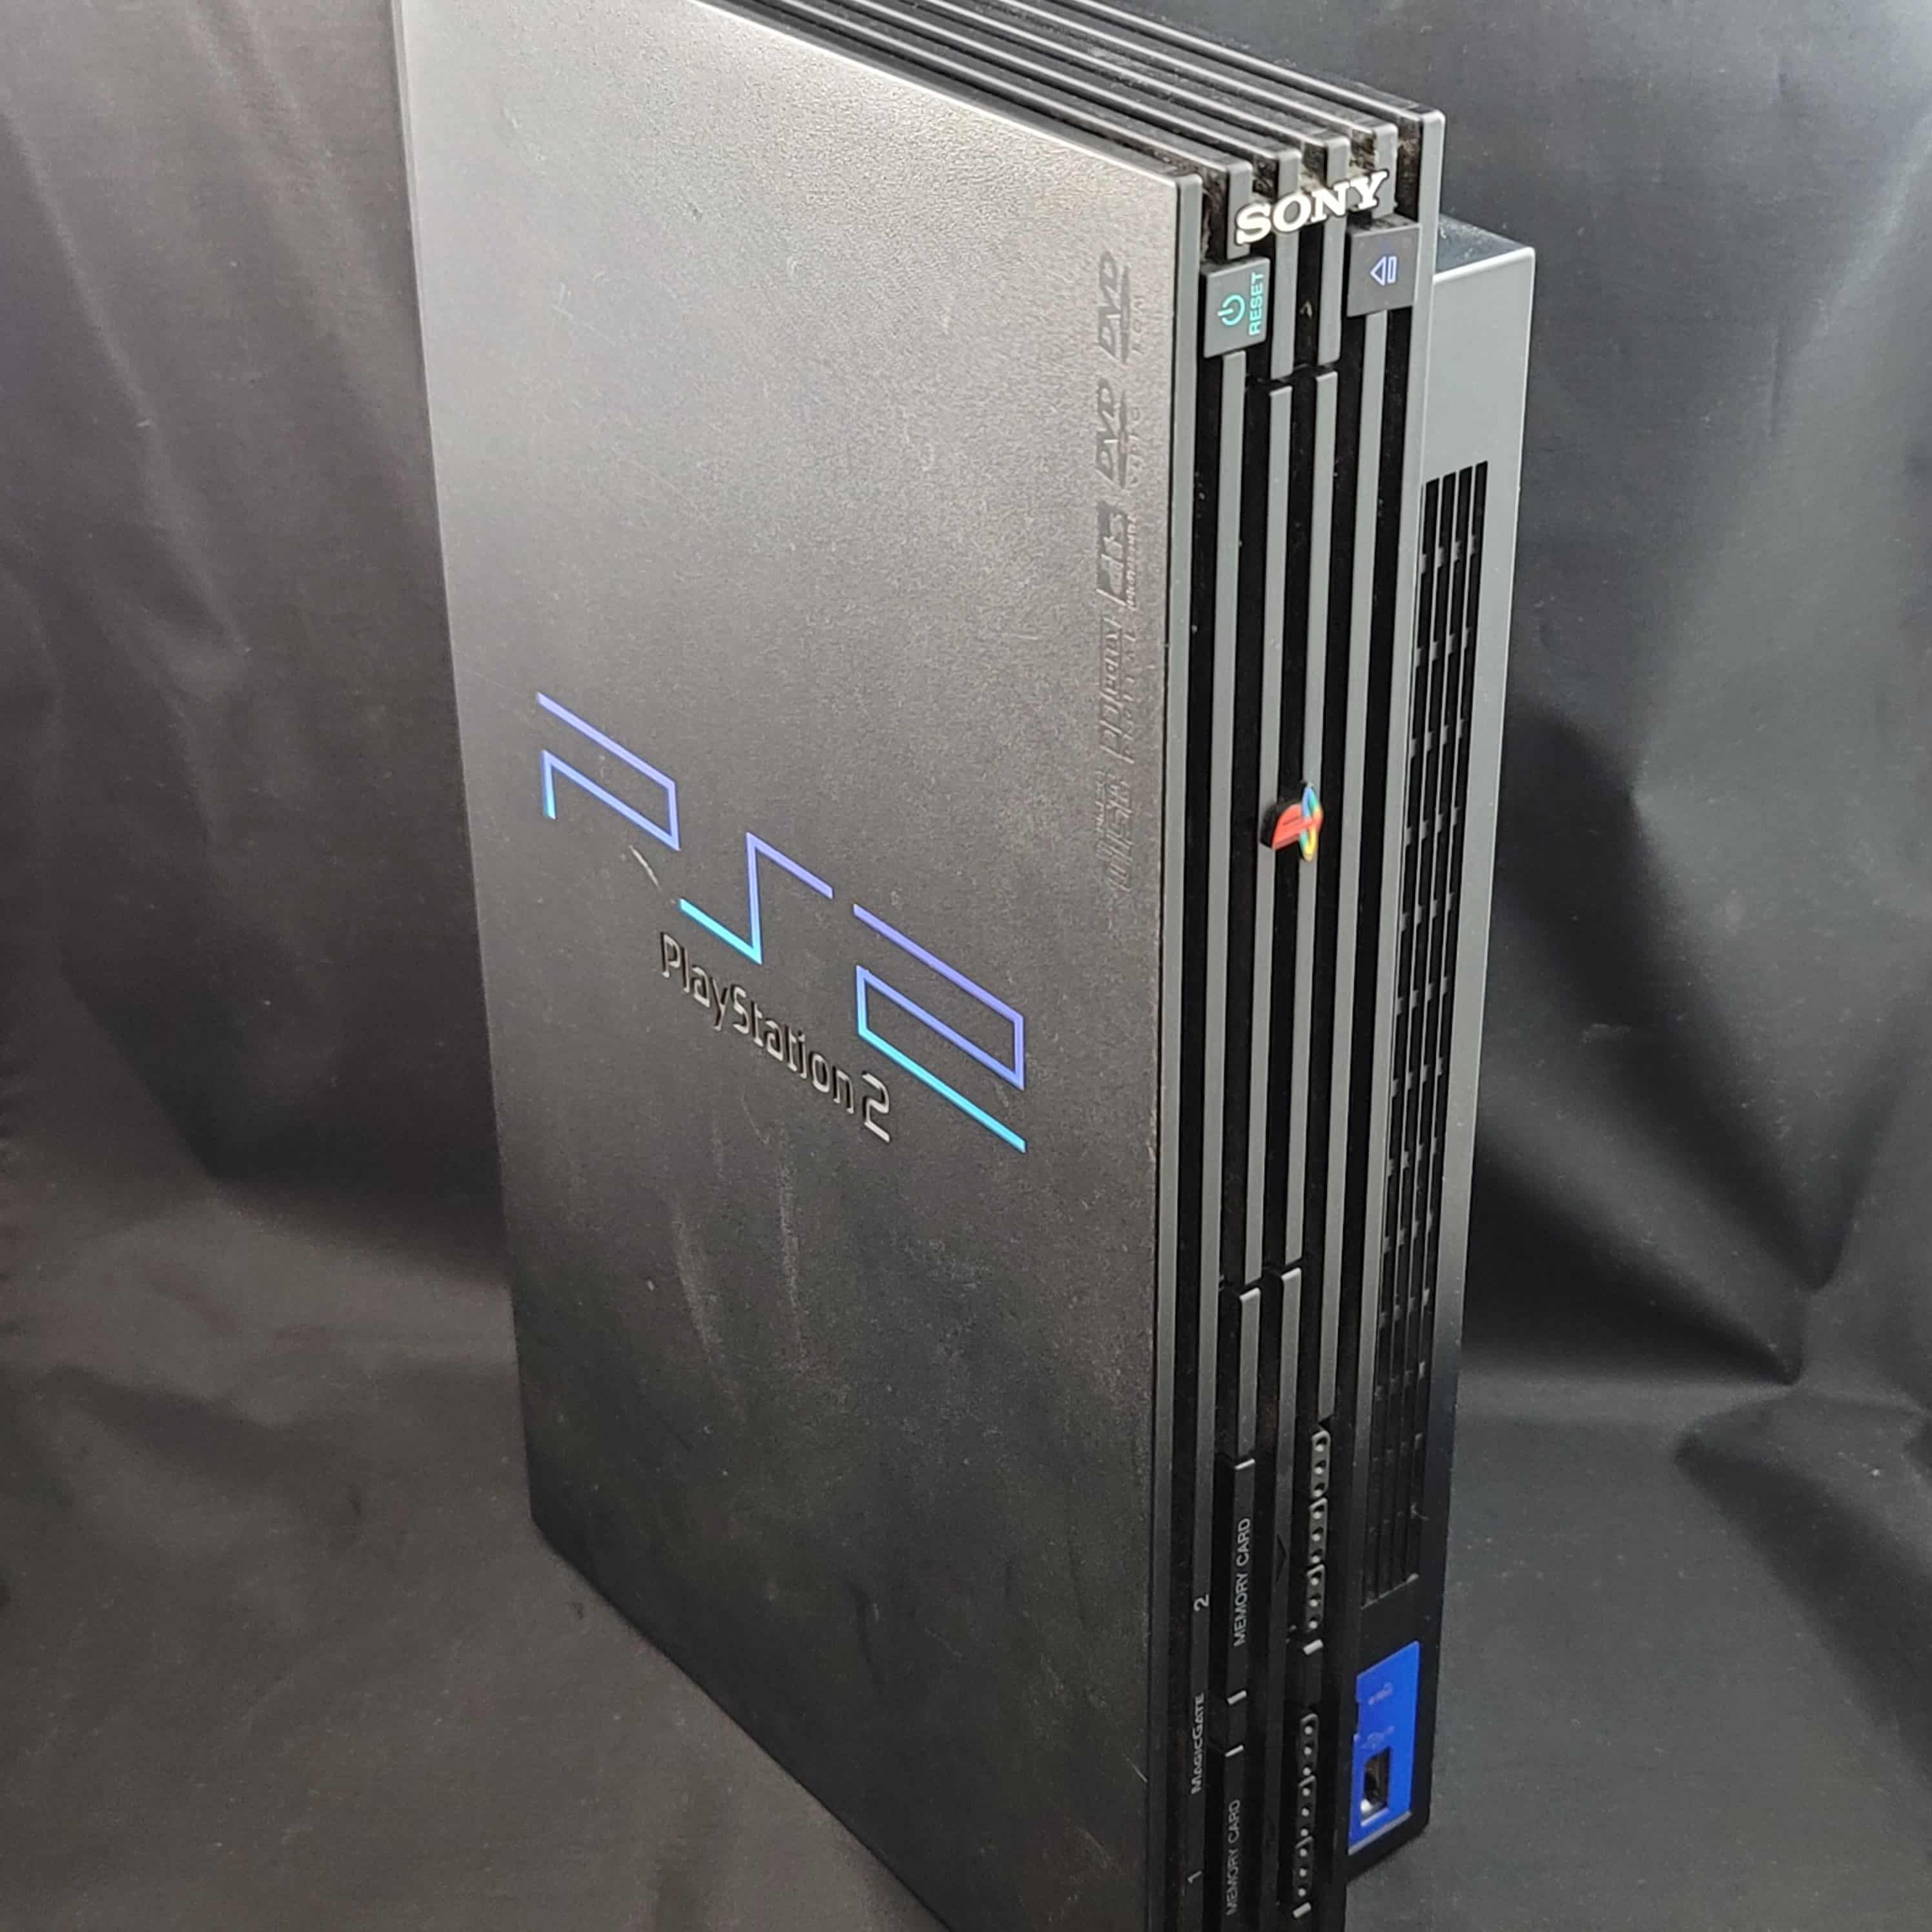 Sony PlayStation 2 System Complete